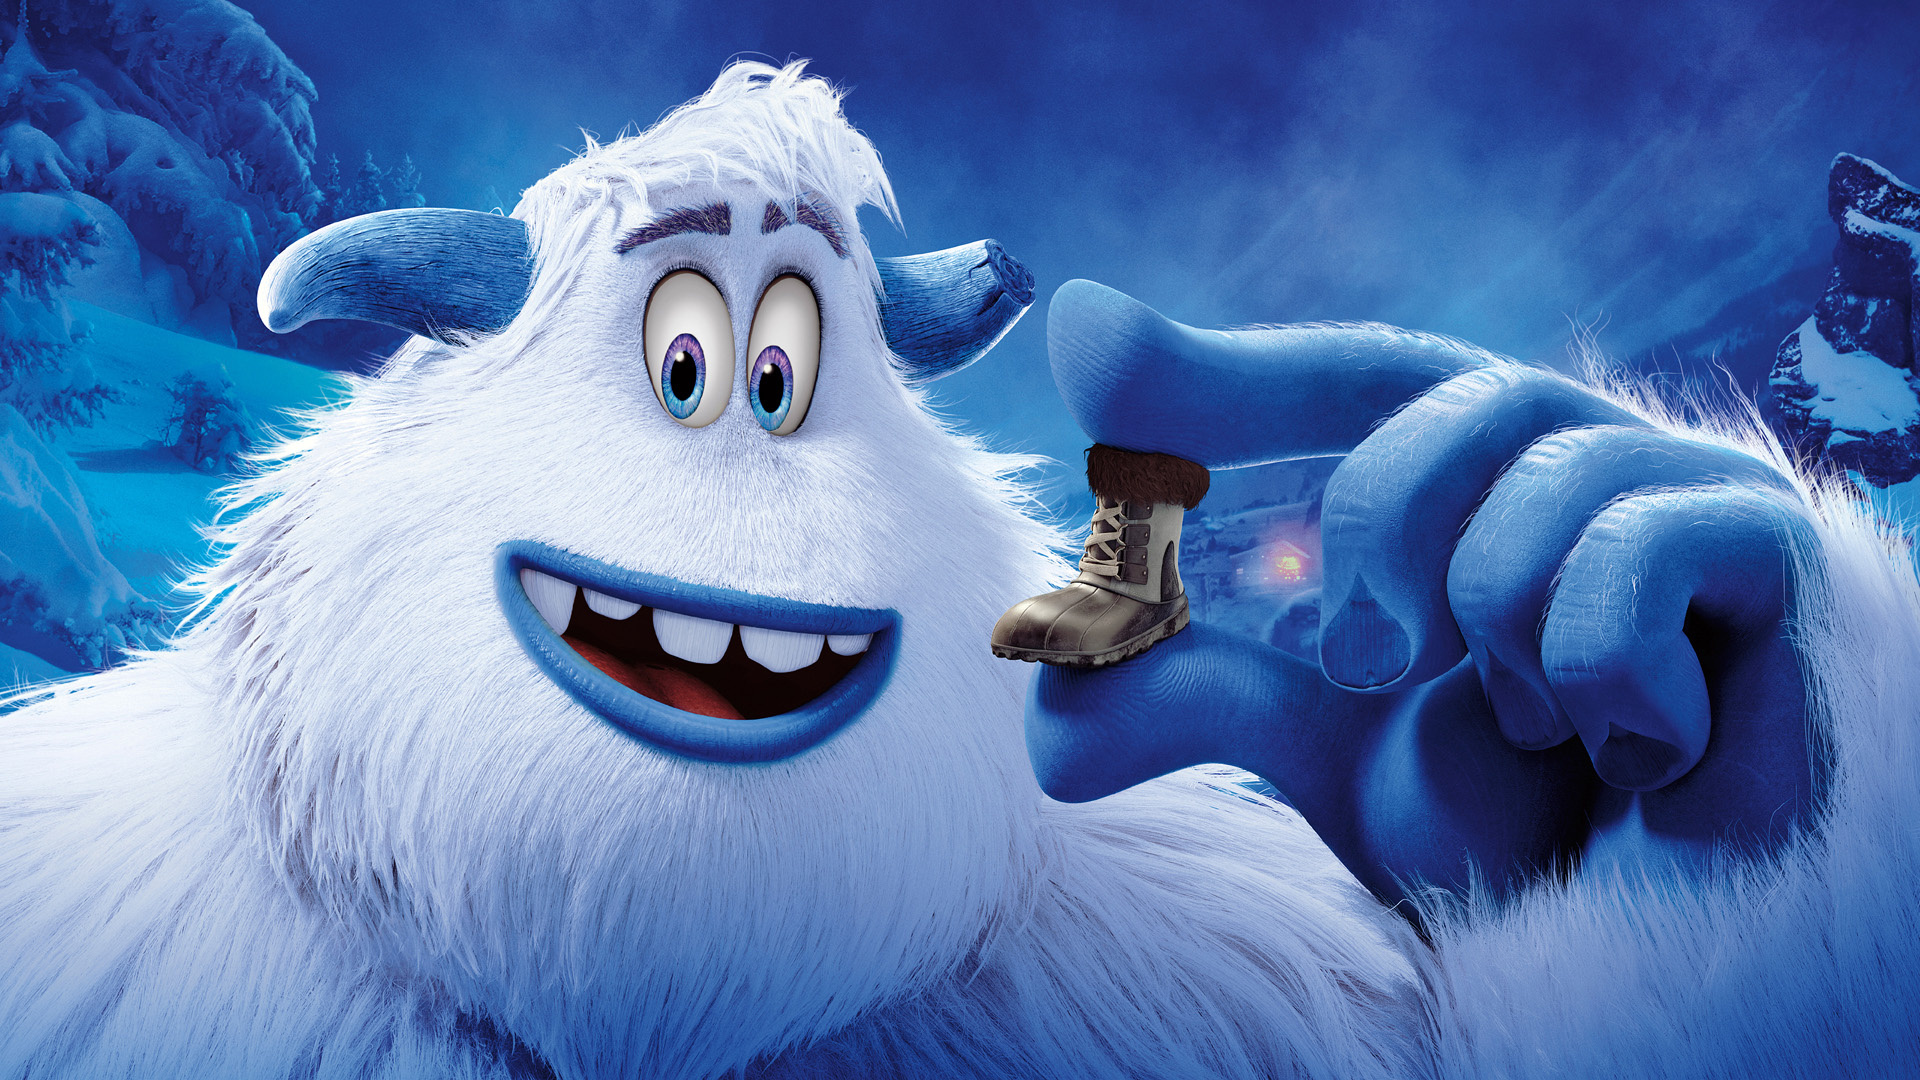 Smallfoot animation, Fanart, Animated film, Adorable characters, 1920x1080 Full HD Desktop